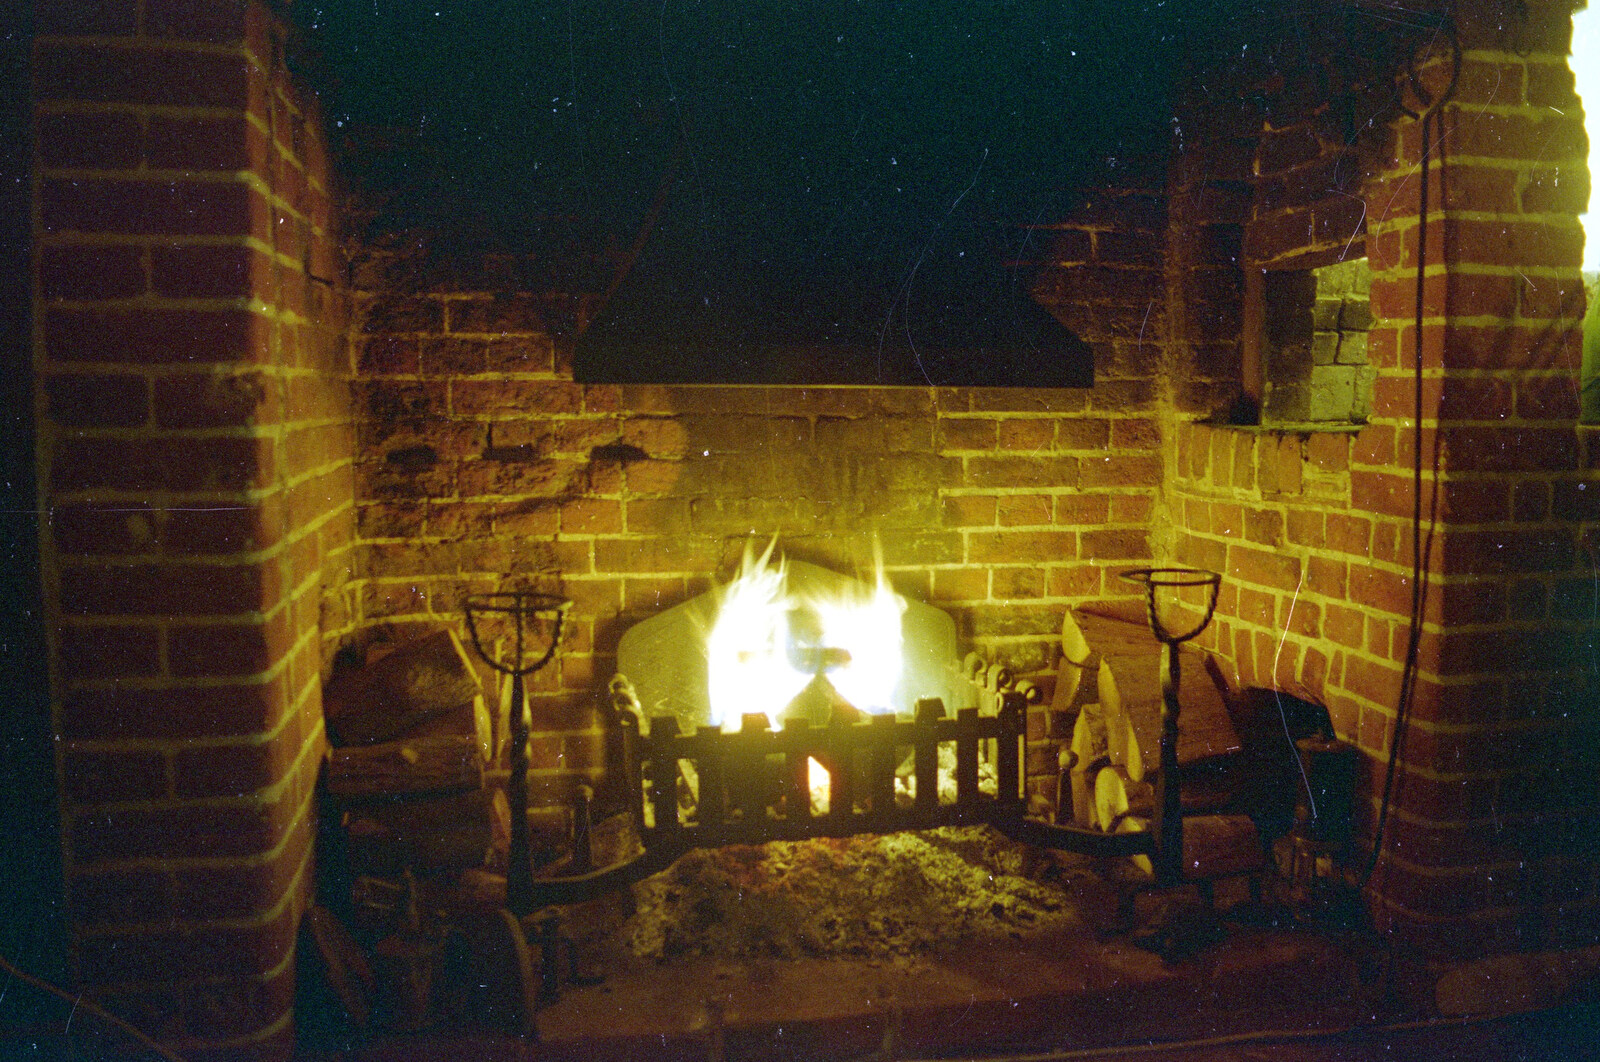 A roaring fireplace from New Year's Eve in the Swan Inn, Brome, Suffolk - 31st December 1995